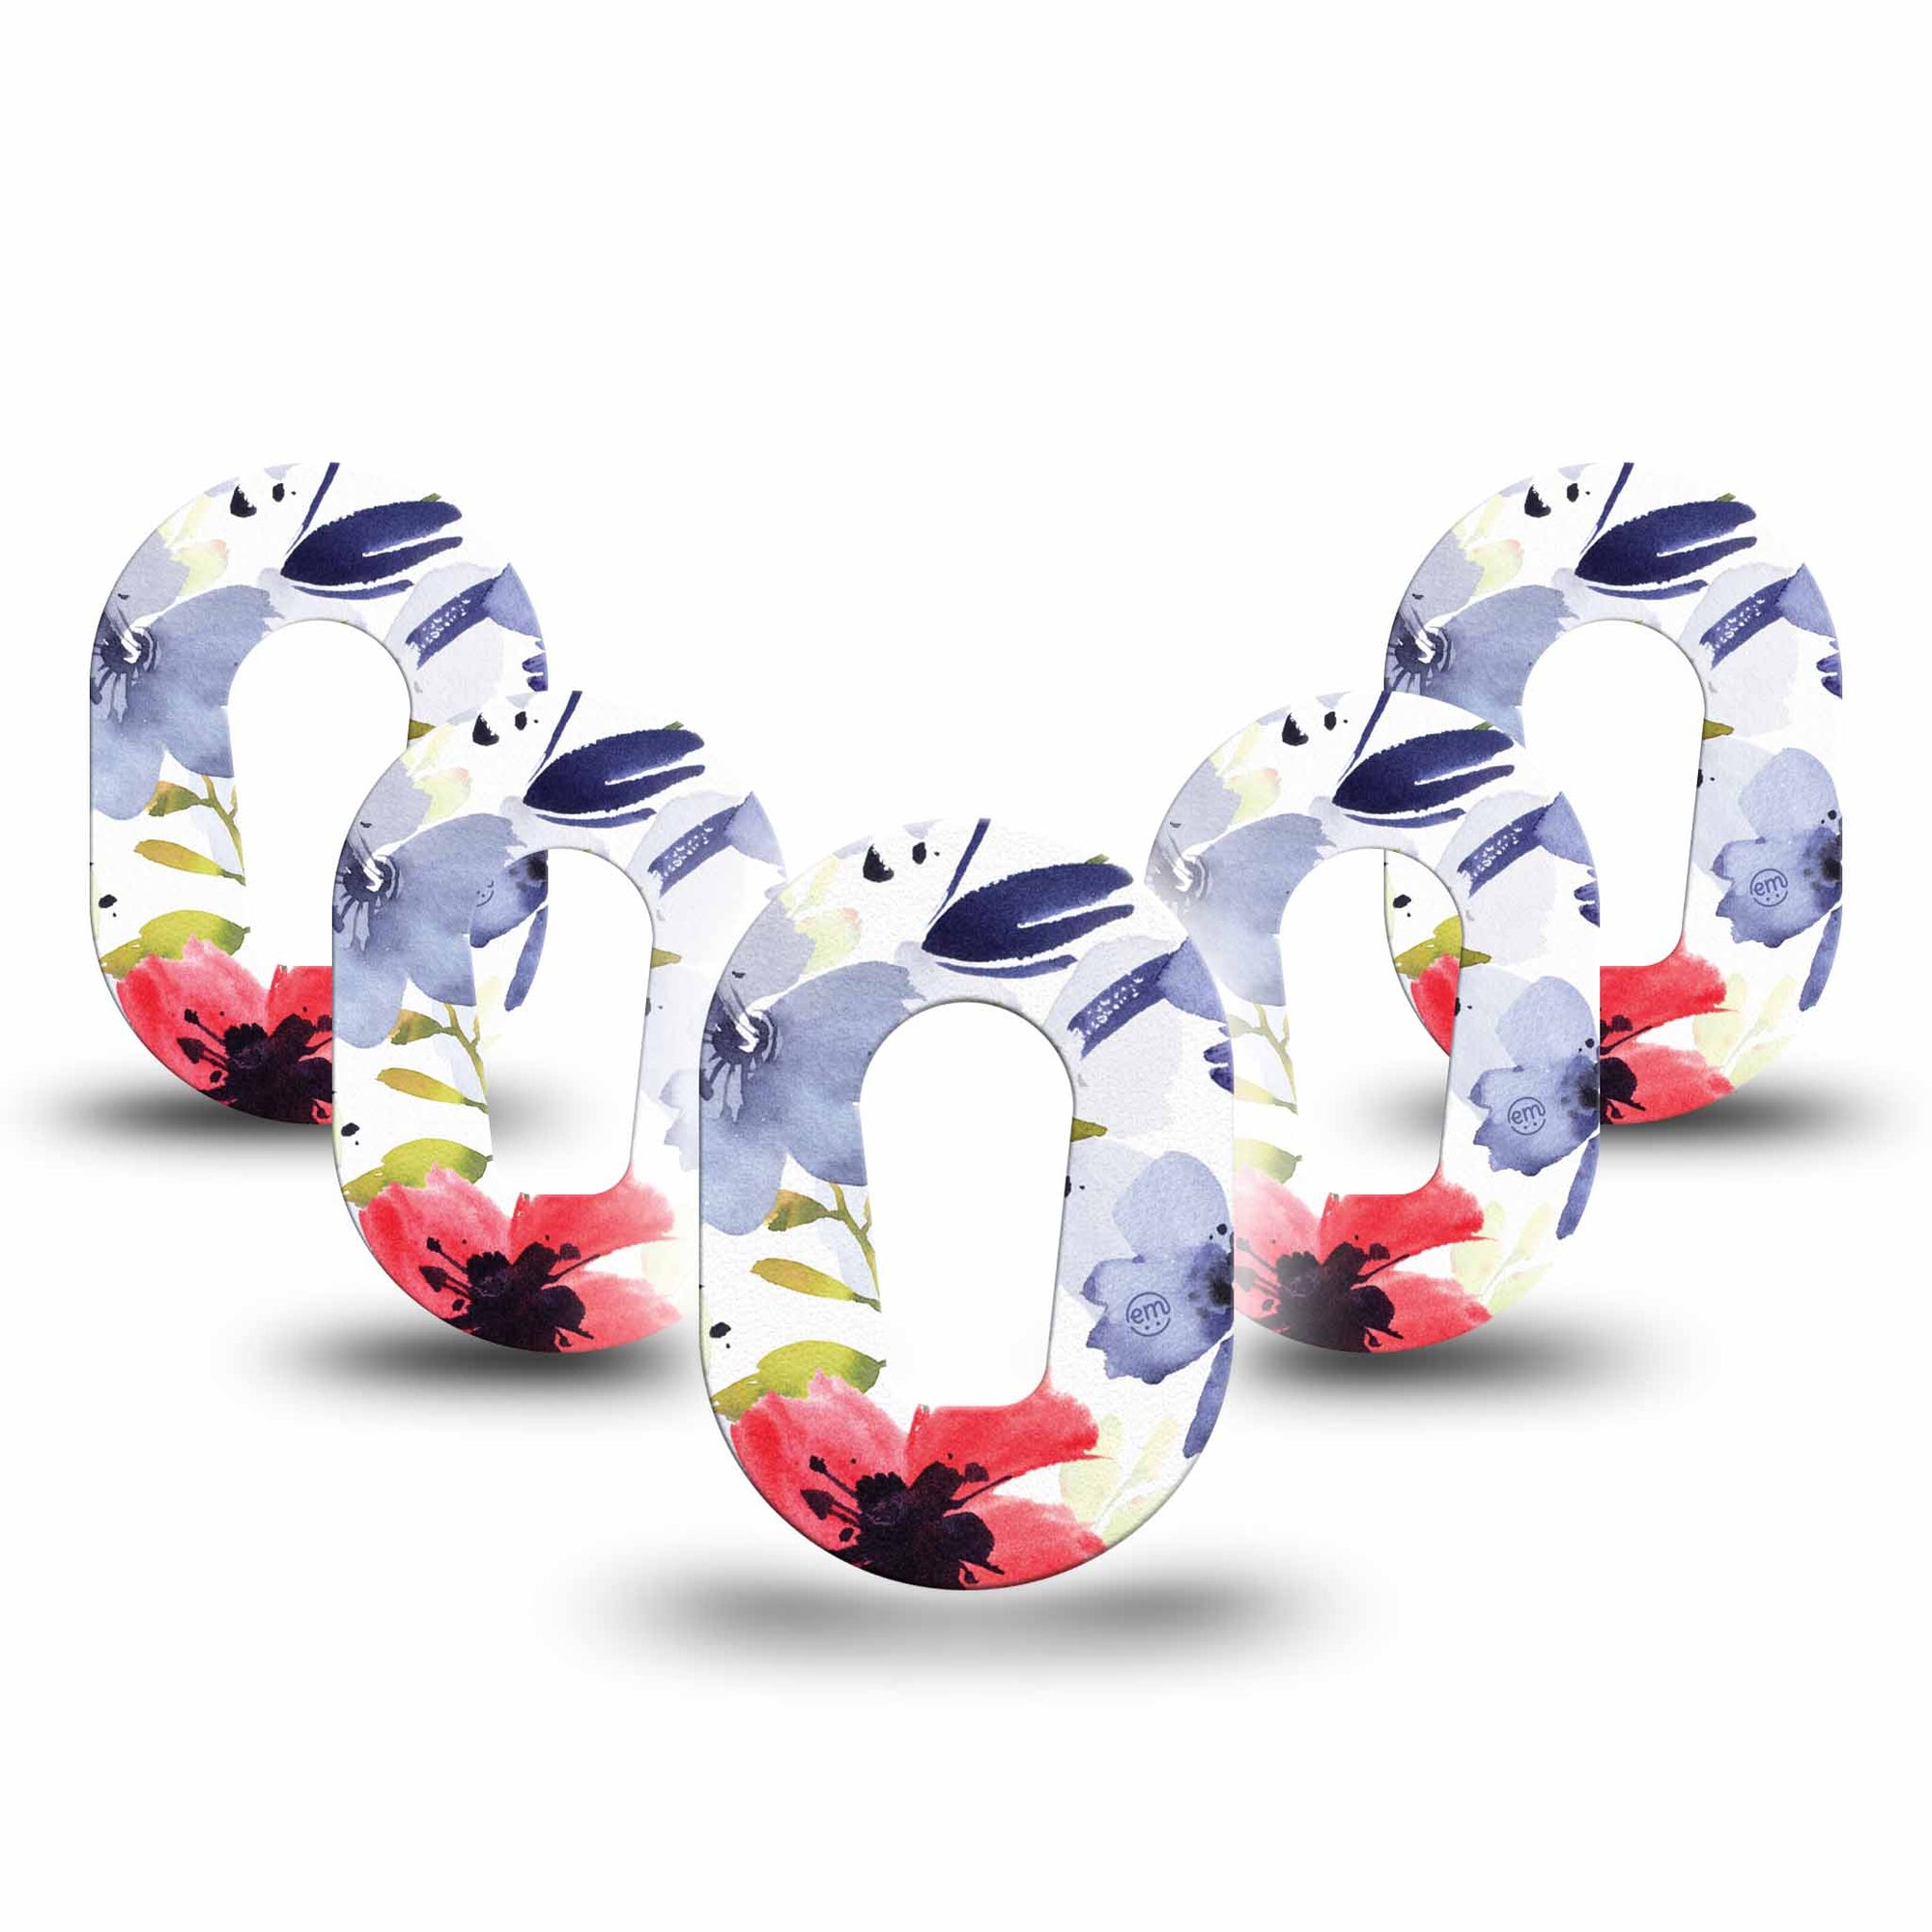 ExpressionMed Red White & Blue Flowers G6 Mini Tapes